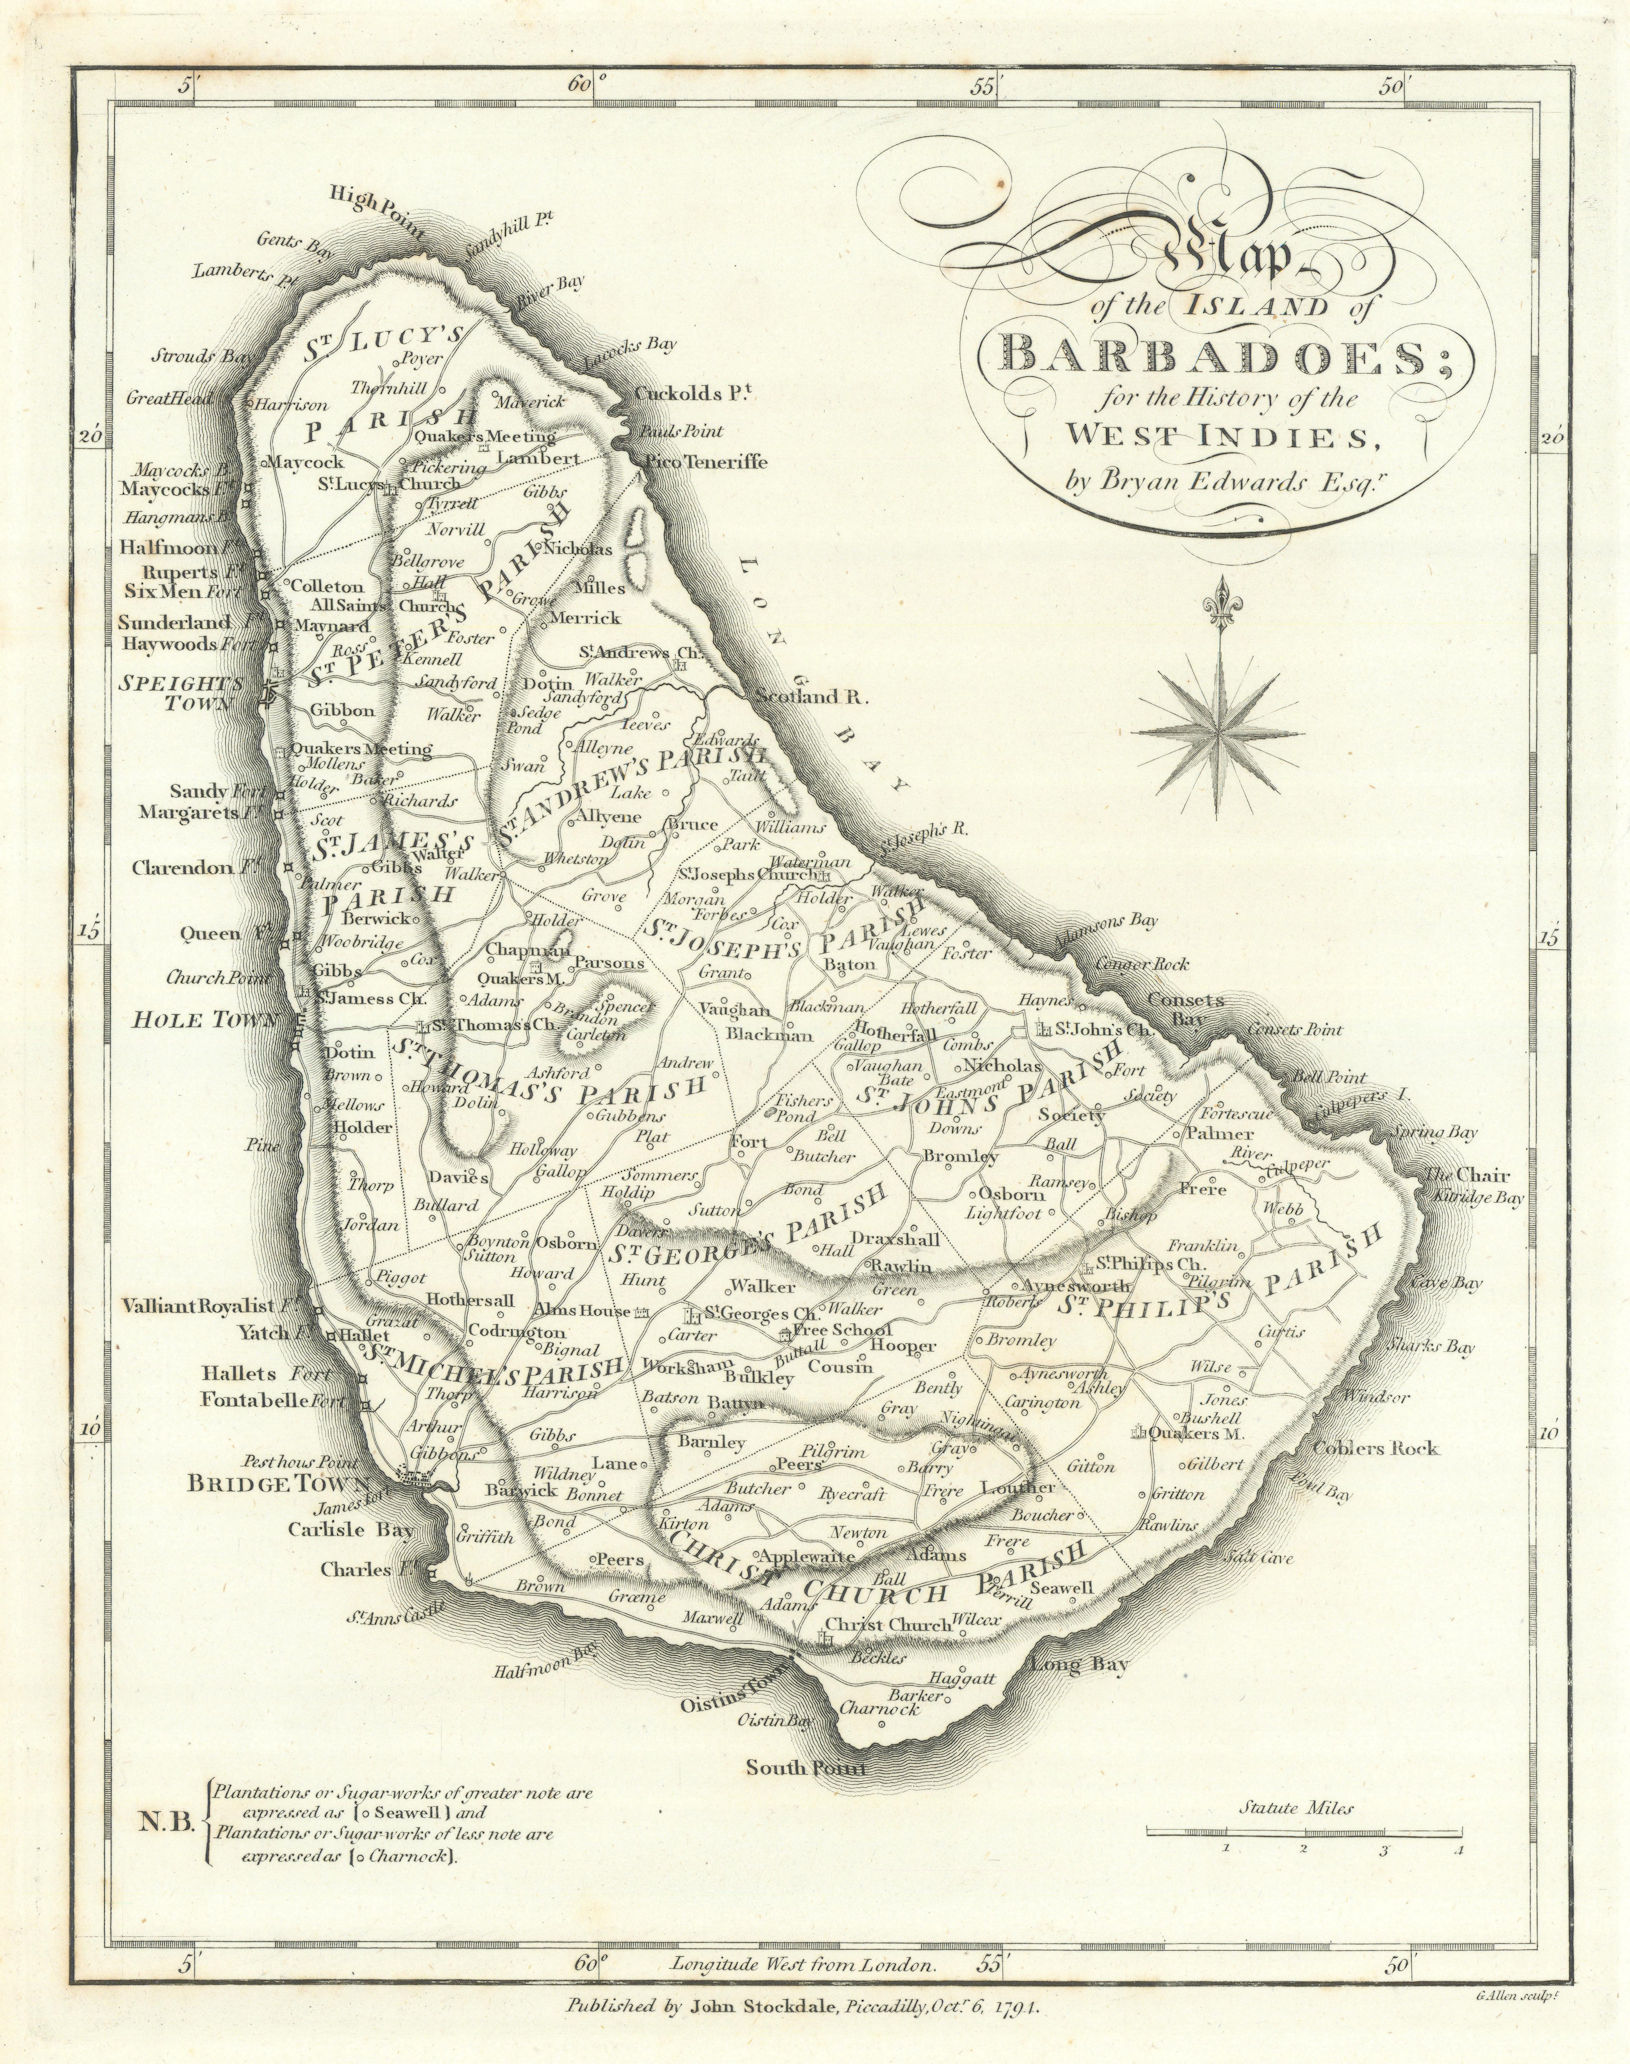 Associate Product 'A Map of the Island of Barbadoes', by Bryan EDWARDS. BARBADOS. West Indies 1794